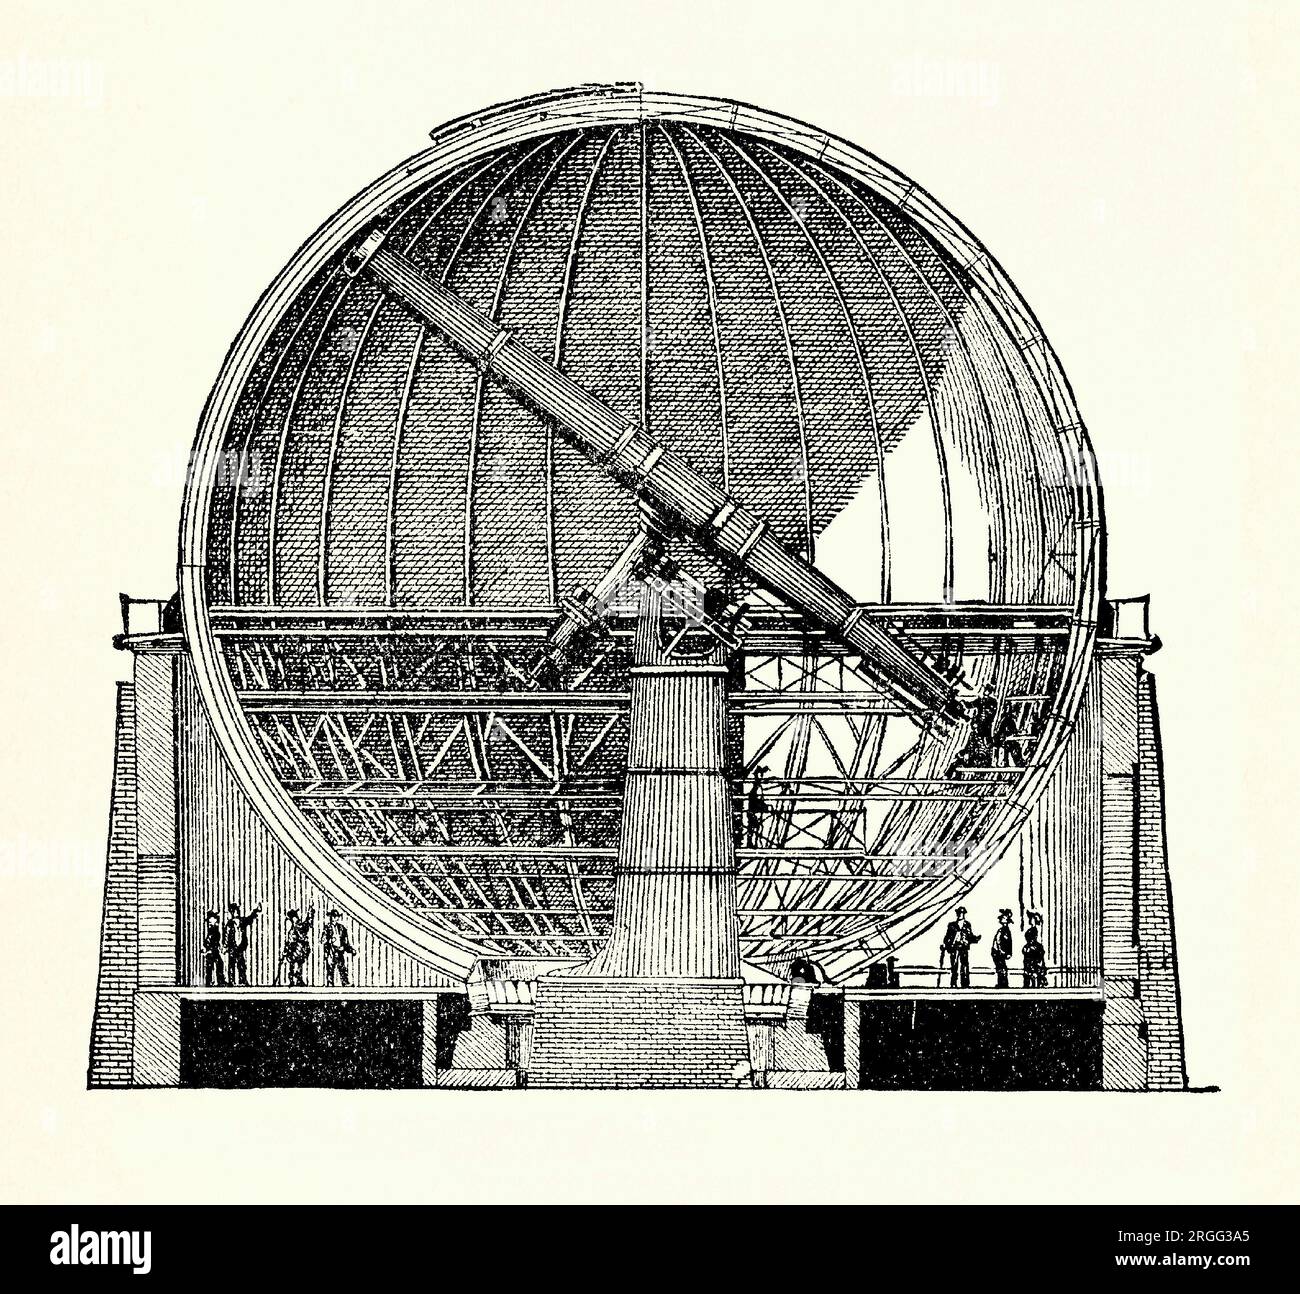 An old engraving of The James Lick Telescope at the University of California's Lick Observatory, Mount Hamilton, California, USA c.1890. It is from an American history book of 1895. The James Lick Telescope is a refracting telescope built in 1888. It has a lens 91 centimetres (36 in) in diameter –a major achievement in its day and it was the largest refracting telescope in the world until 1897. It is on the summit of Mount Hamilton, in the Diablo Range just east of San Jose, California. The instrument (also called the ‘Great Lick Refractor’ or simply ‘Lick Refractor’) is still operating. Stock Photo